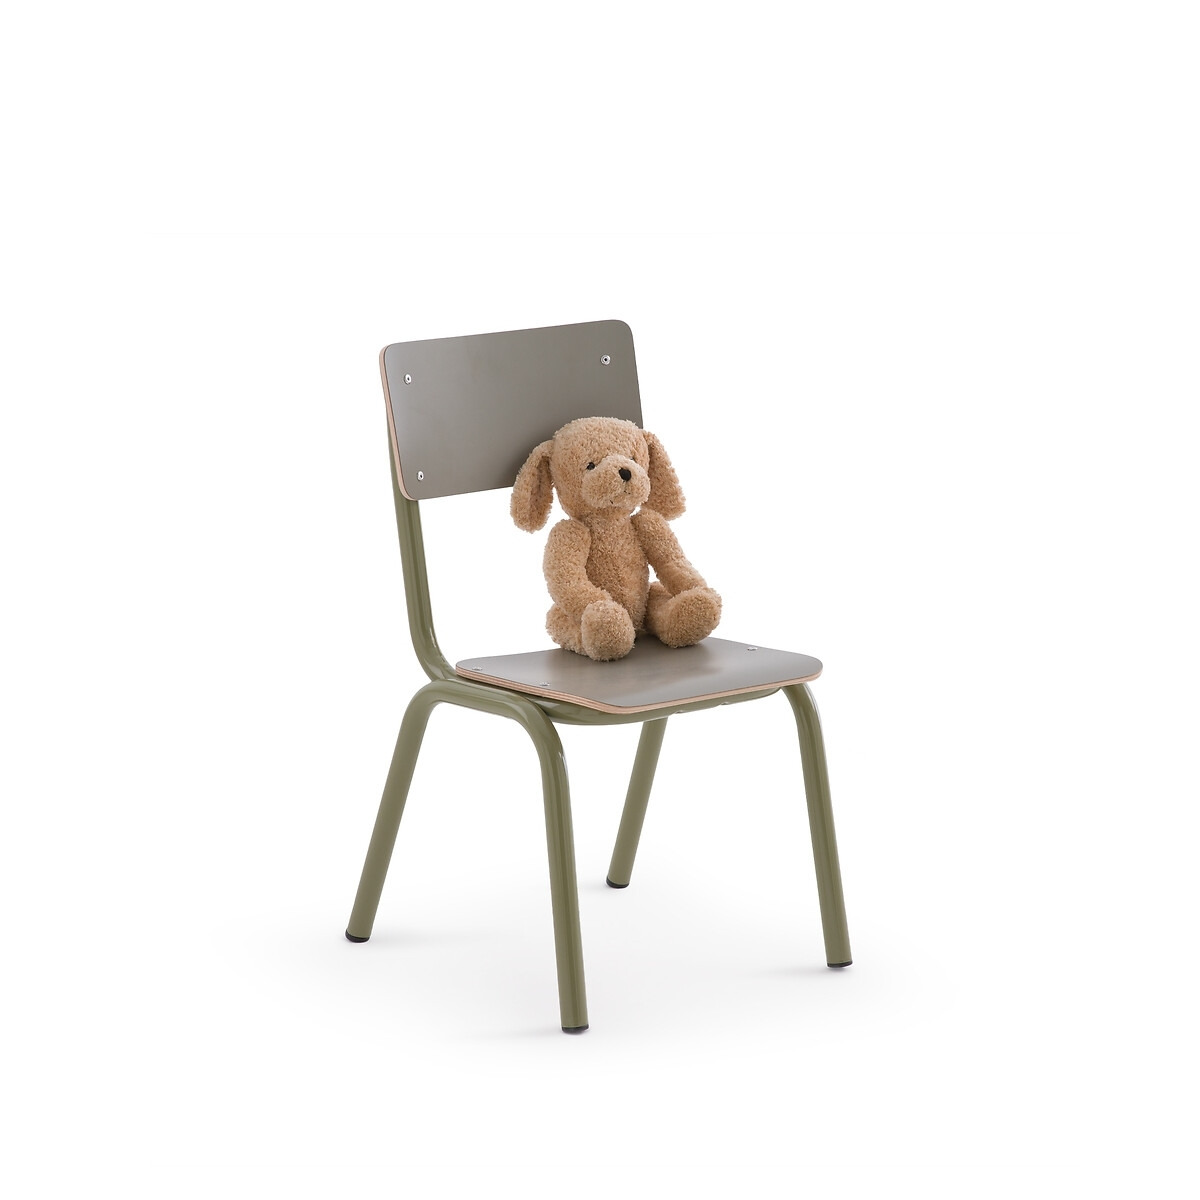 Susy Child's School Chair - image 1